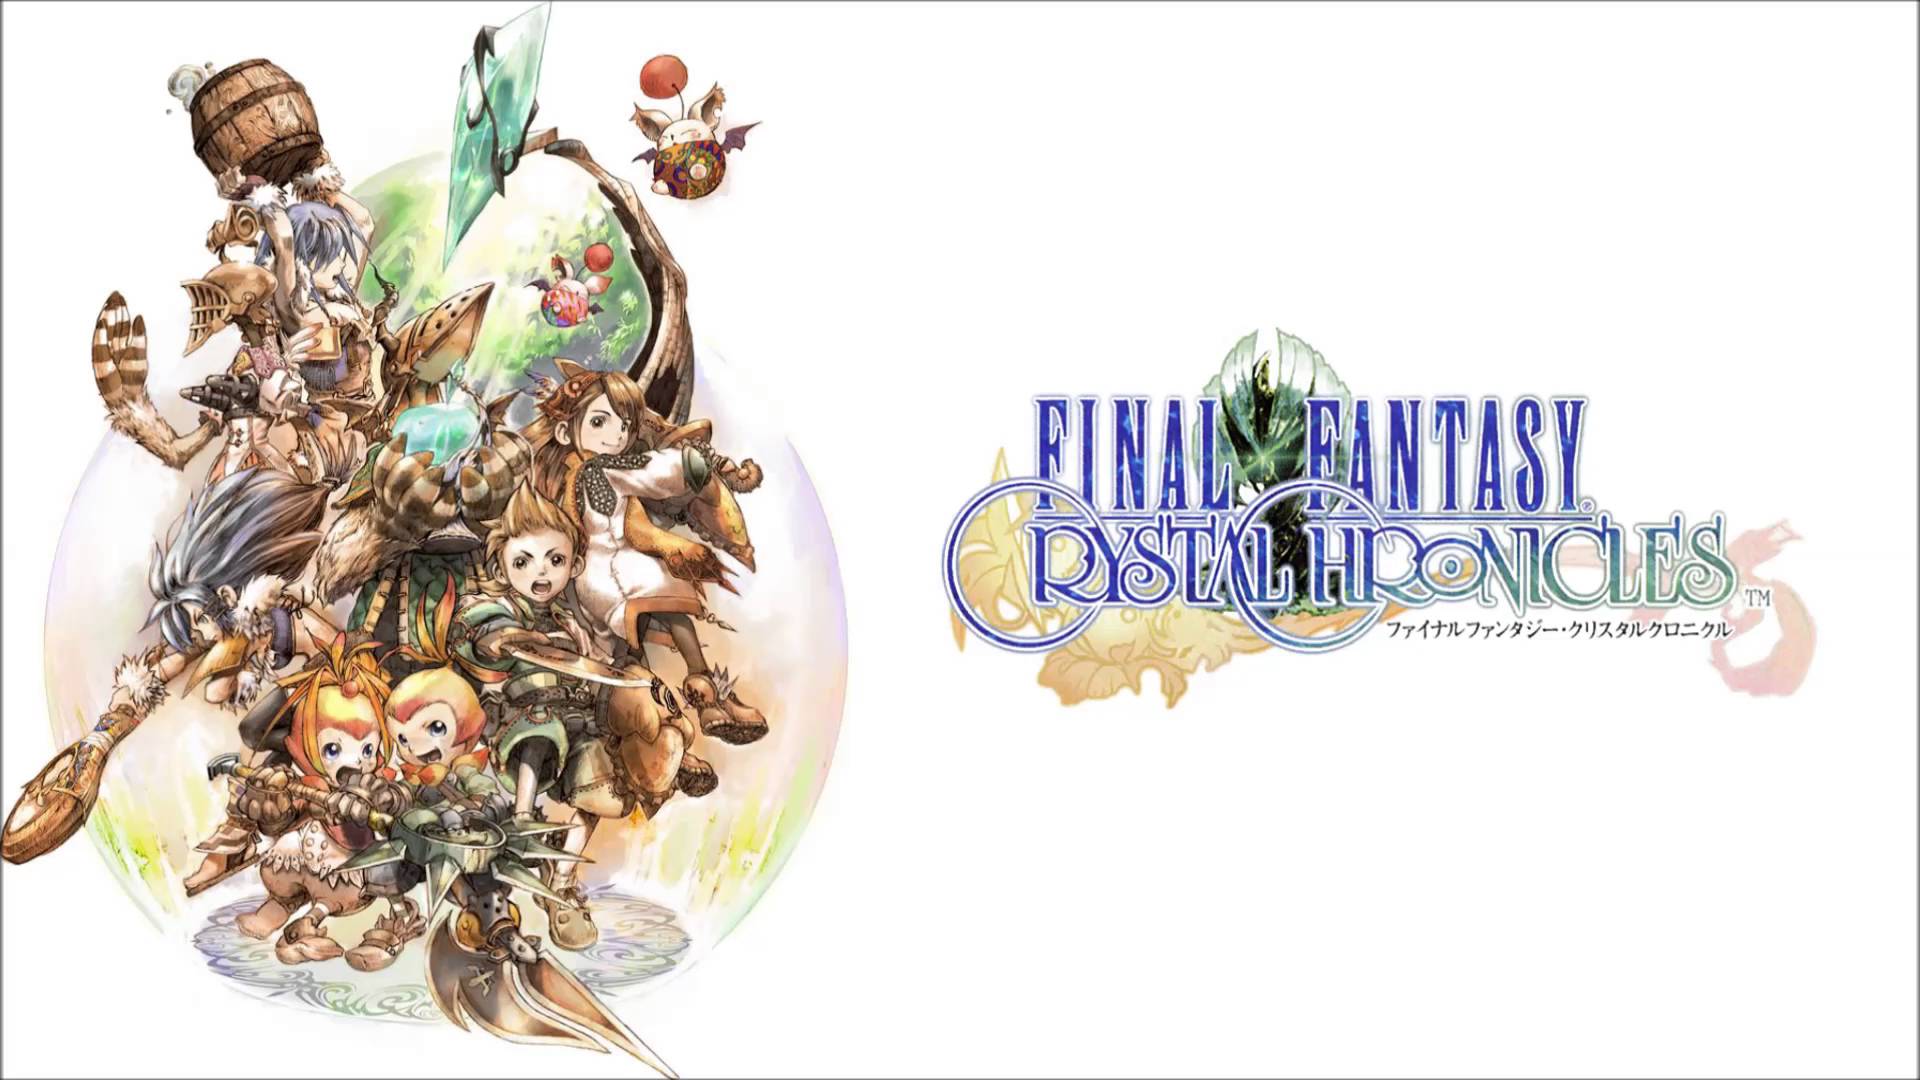 Final Fantasy Crystal Chronicles Returns With Remastered Versions For The Nintendo Switch and PS4